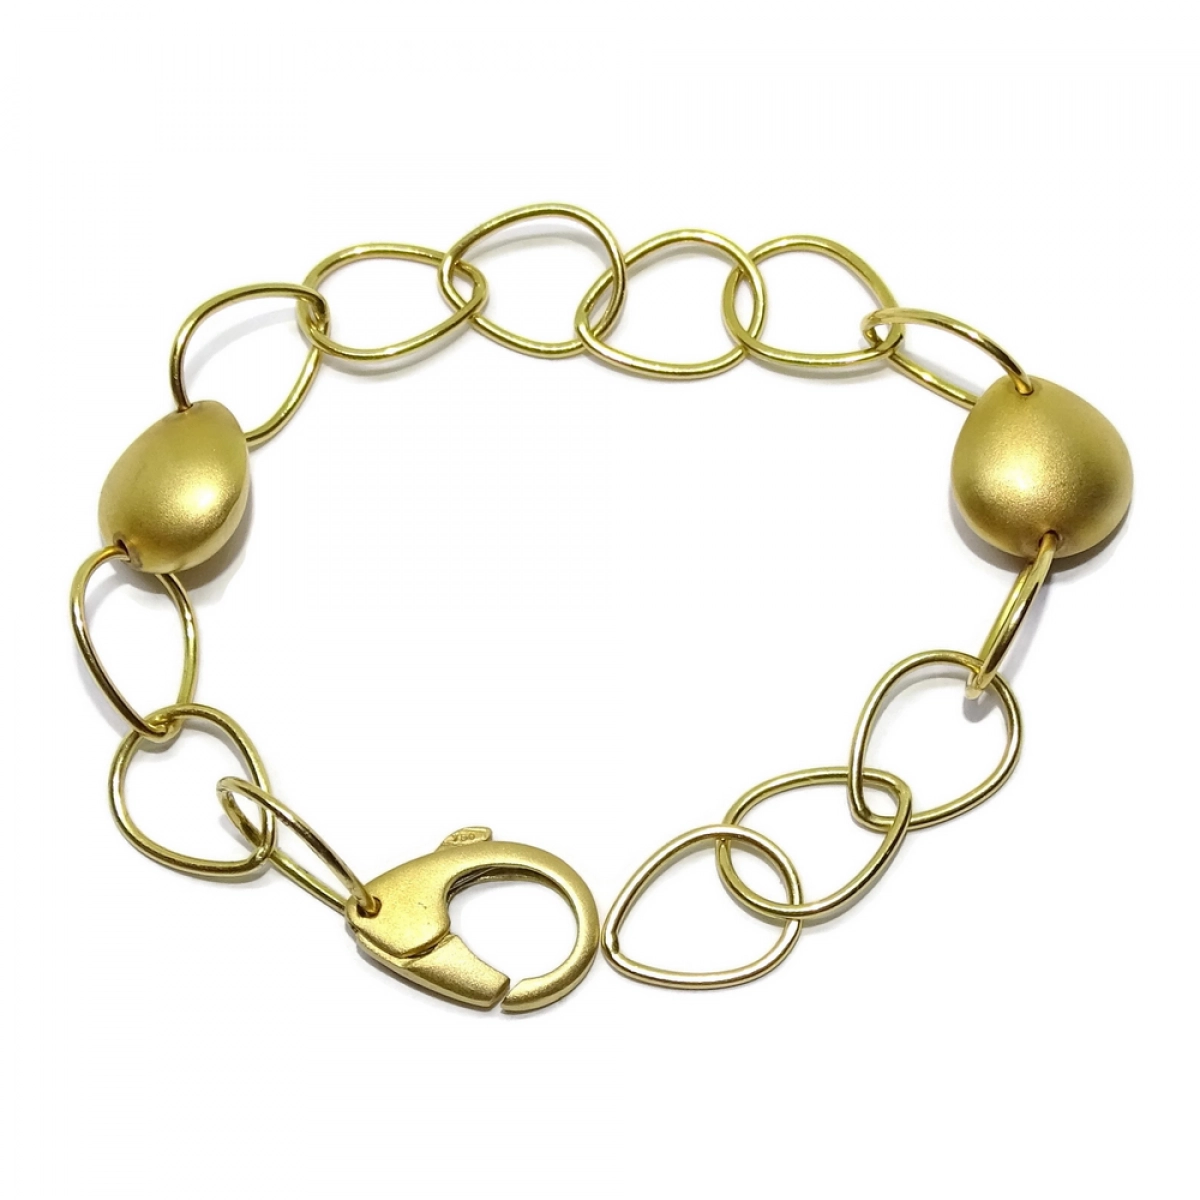 STUNNING AND BOLD BRACELET 18K YELLOW GOLD WITH 2 GOLD NUGGETS NEVER SAY NEVER